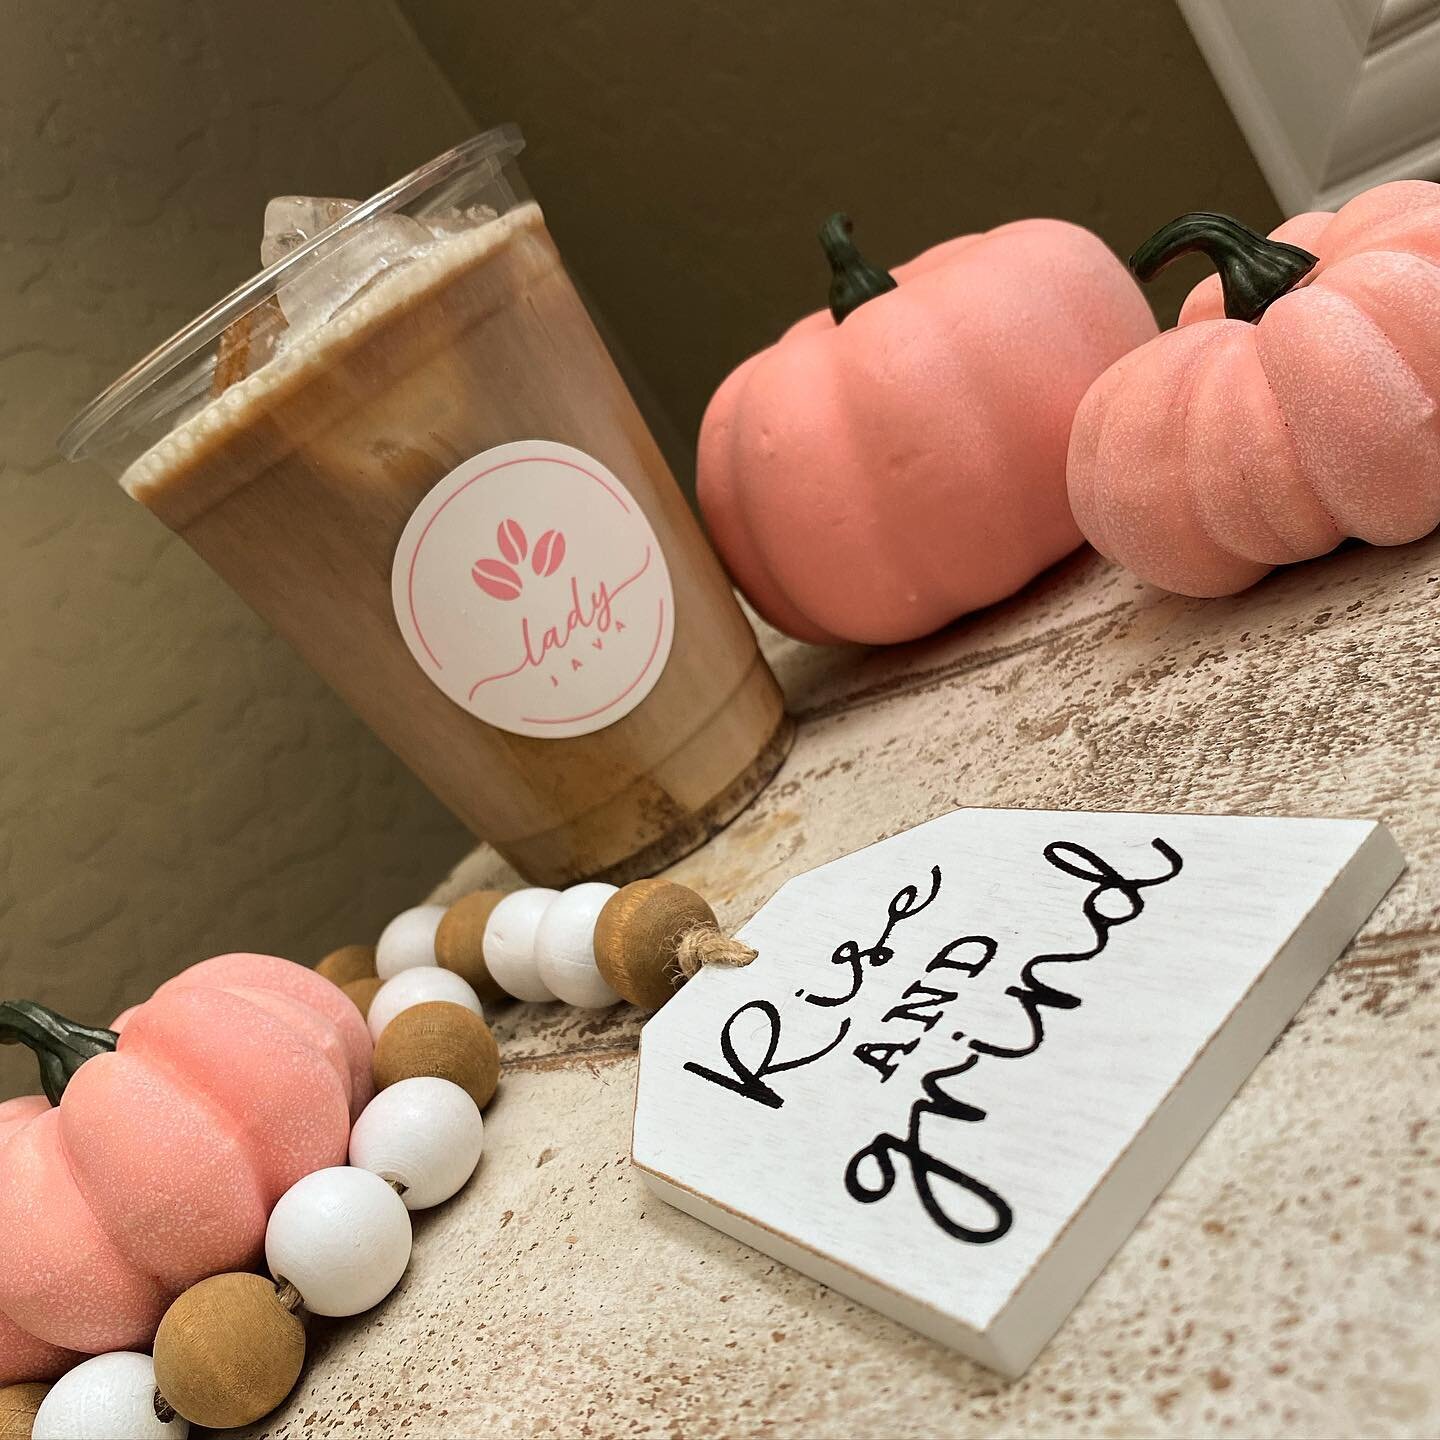 Didn&rsquo;t make it on Tuesday? Then maybe you didn&rsquo;t know that pumpkin season has started at LJ! Stop by for a Pumpkin Cold Brew, Pumpkin Chai, or a White Chocolate Pumpkin Latte tomorrow from 7-10 am at Cadence 🎃  Just because it&rsquo;s st